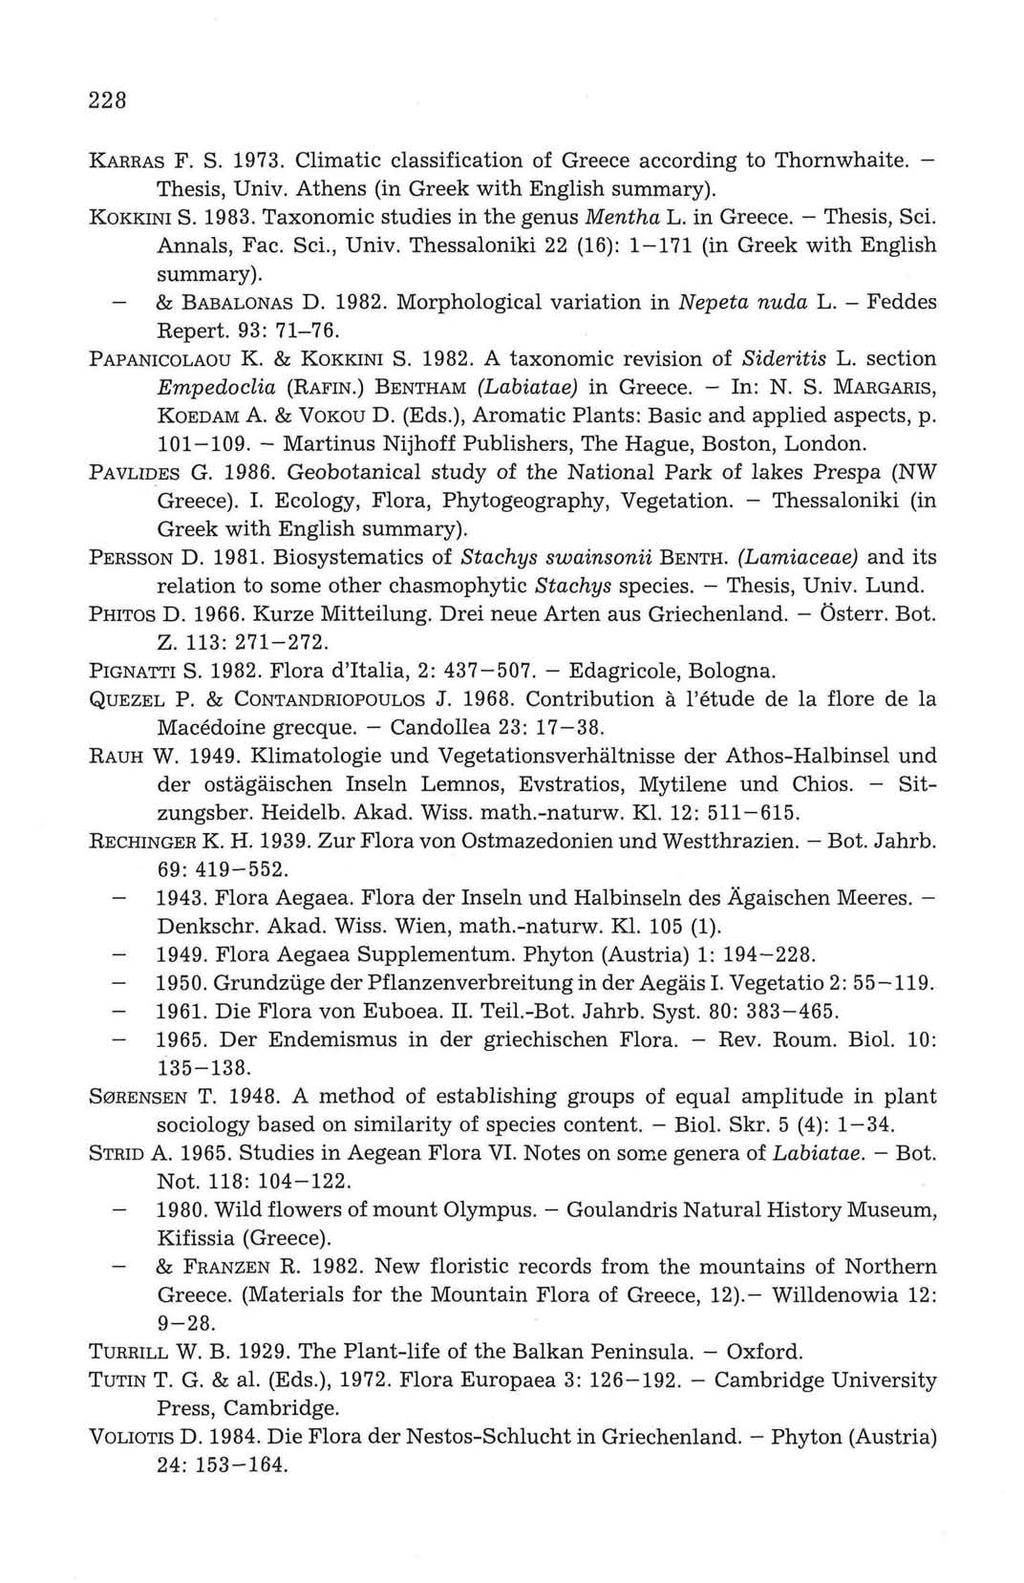 8 KARRAS F. S.. Climatic classification of Greece according to Thornwhaite. Thesis, Univ. Athens (in Greek with English summary). KOKKINI S. 8. Taxonomic studies in the genus Mentha L. in Greece.